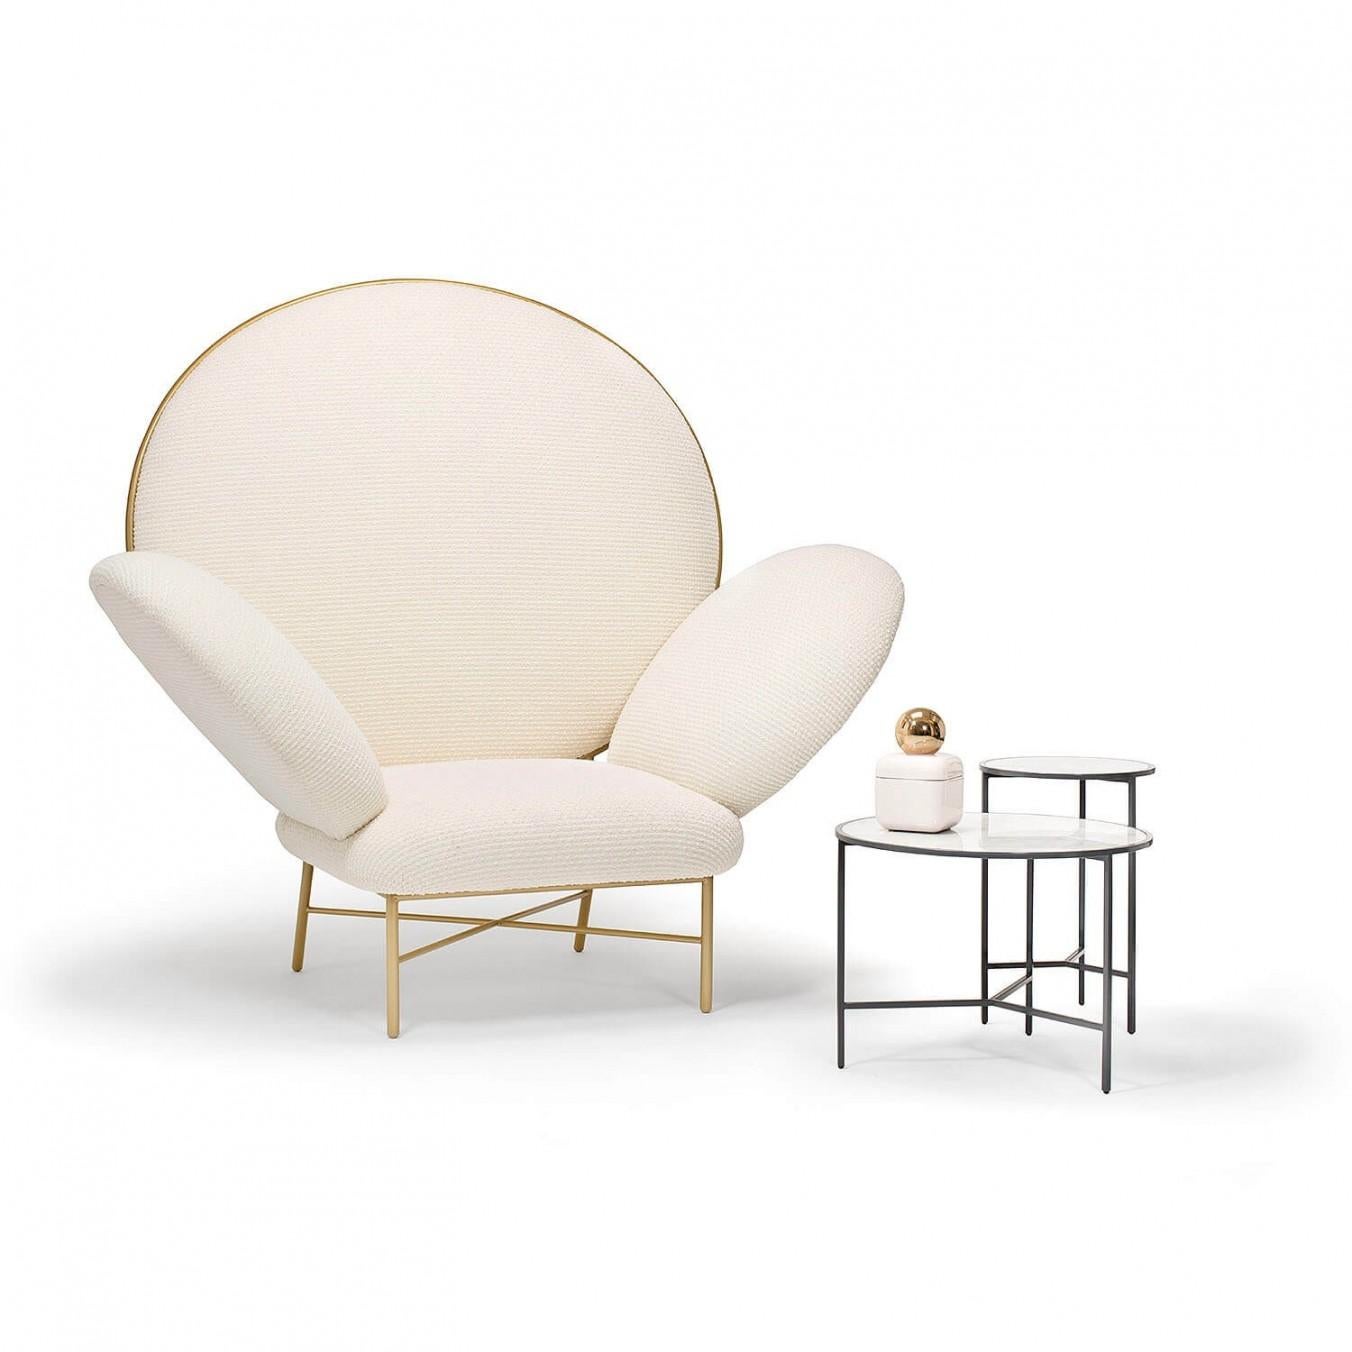 Slovenian Contemporary Ivory Upholstered Armchair, Stay Armchair by Nika Zupanc for Se